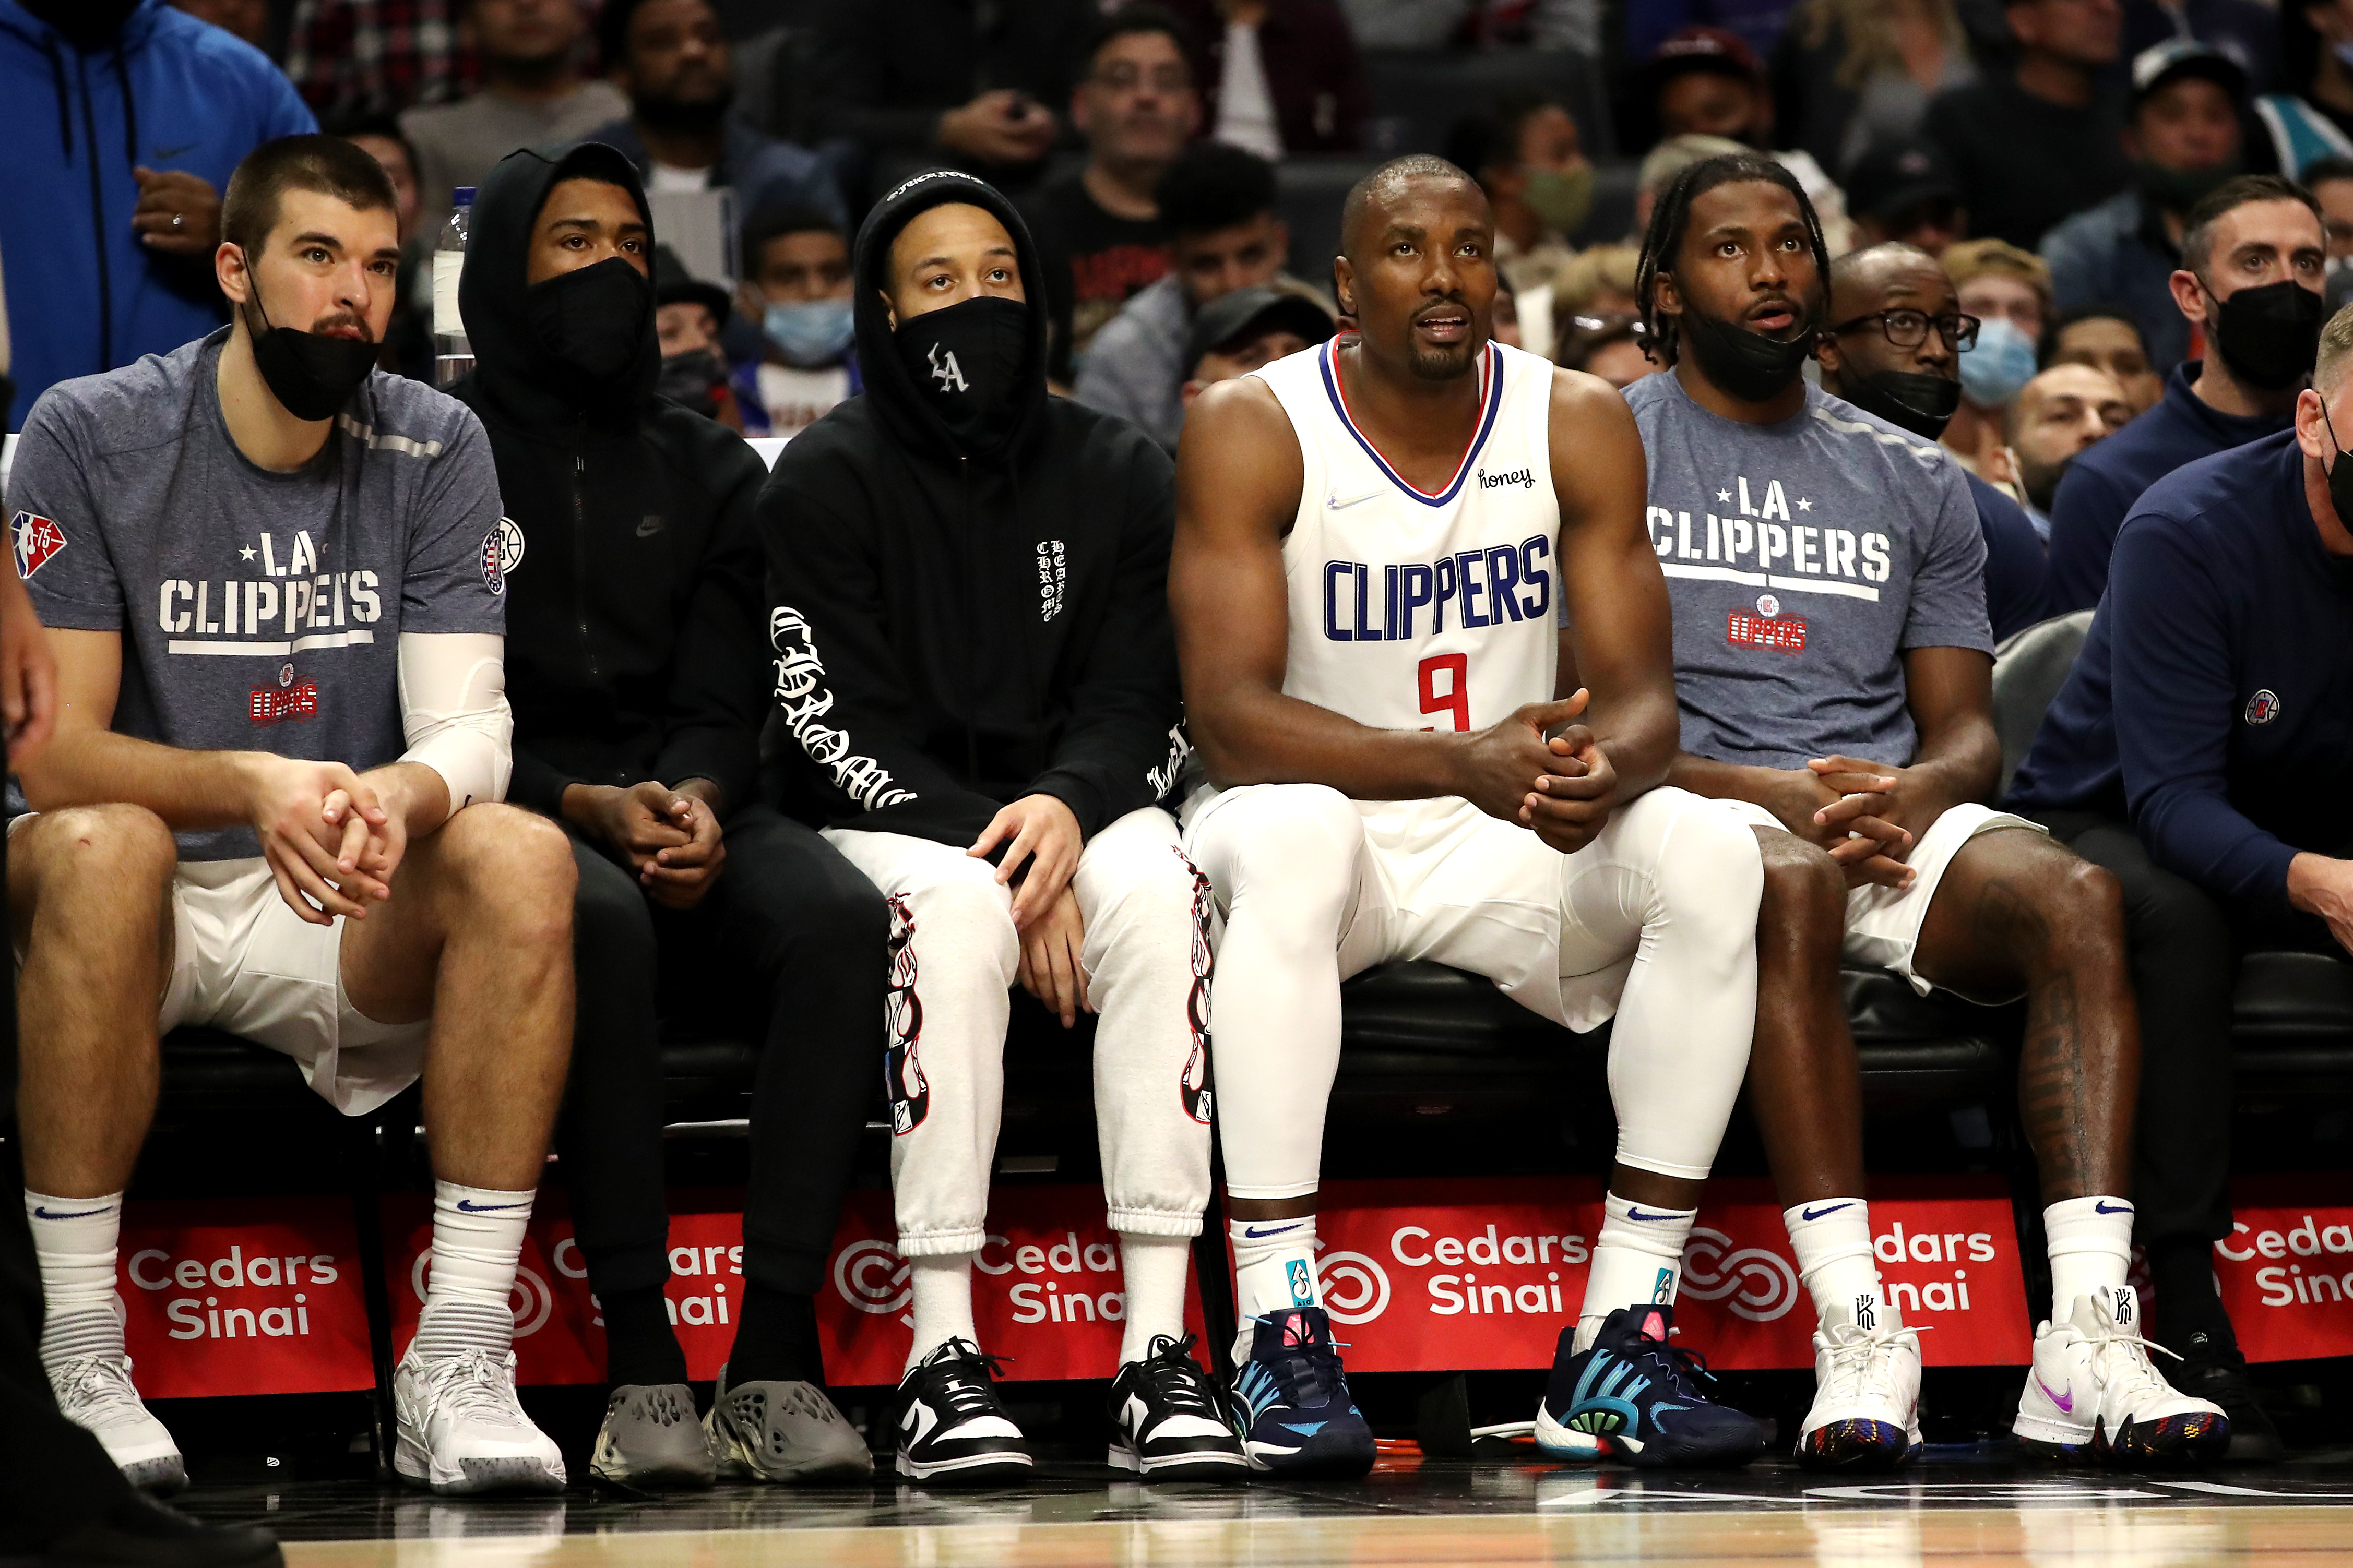 Members of the Los Angeles Clippers sit on the bench during an NBA game against the Charlotte Hornets in November 2021